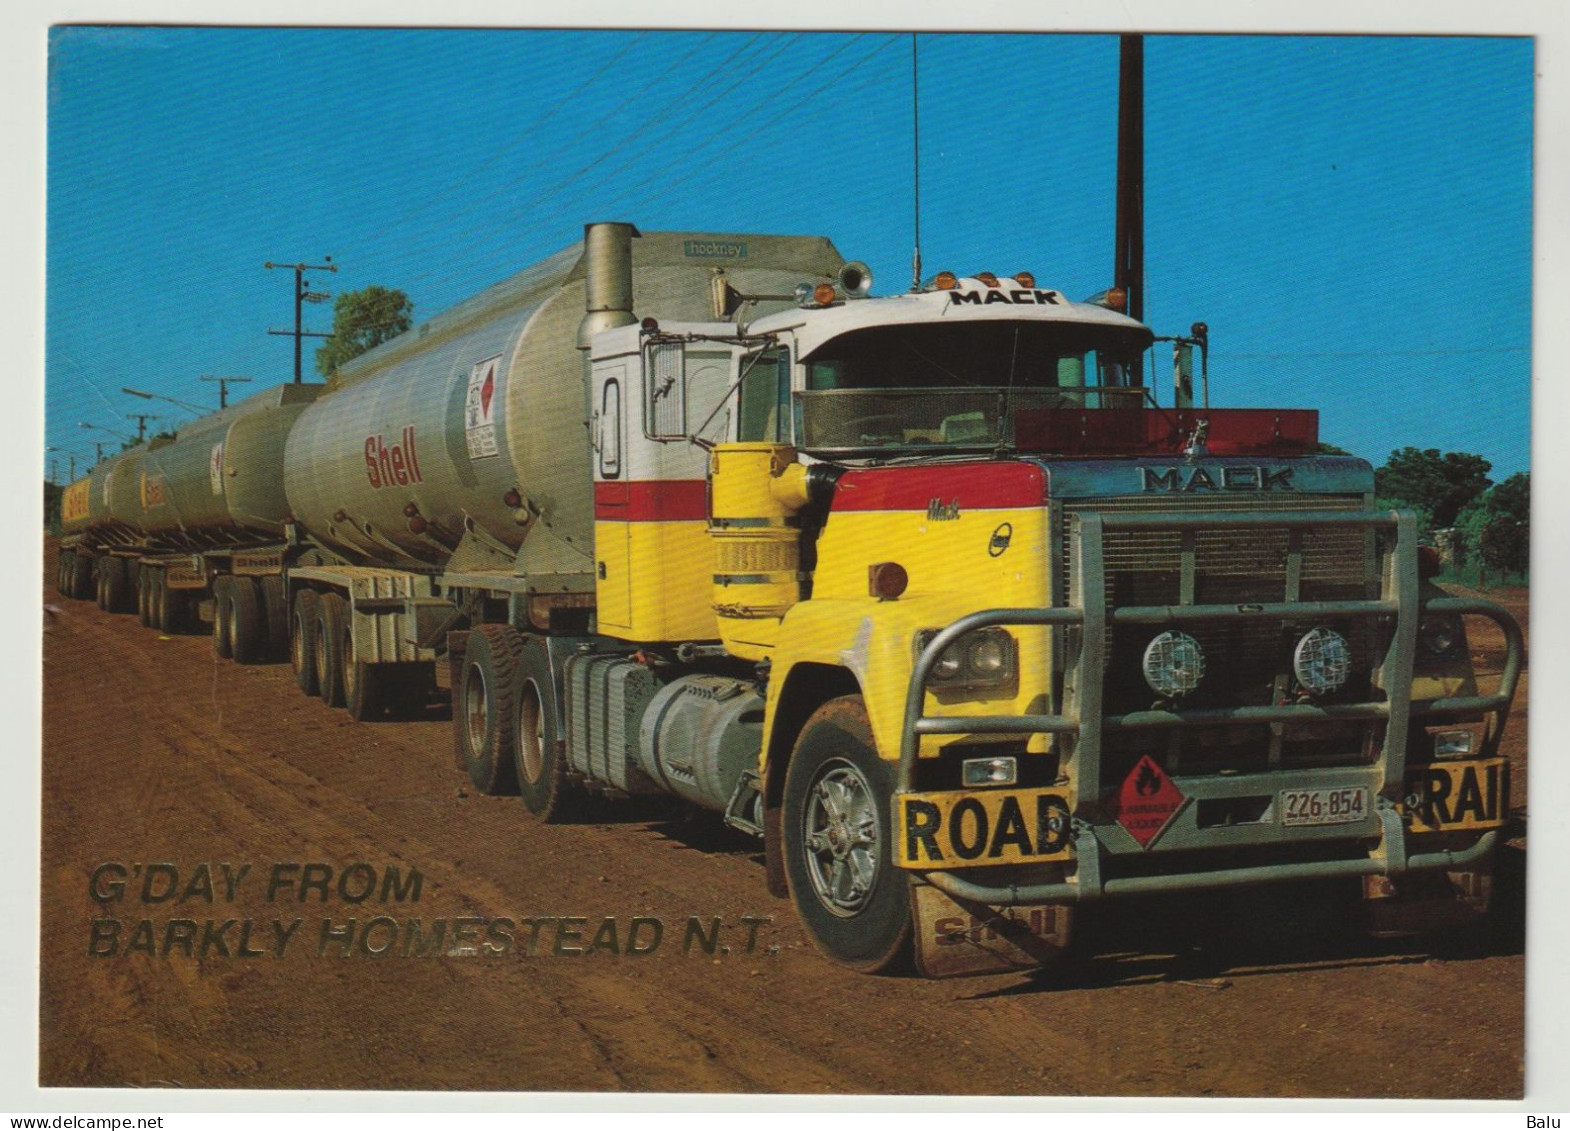 AK G'Day From Barkly Homestead N.T., Road Trains, Postalisch Gelaufen, 3 Scans - Unclassified